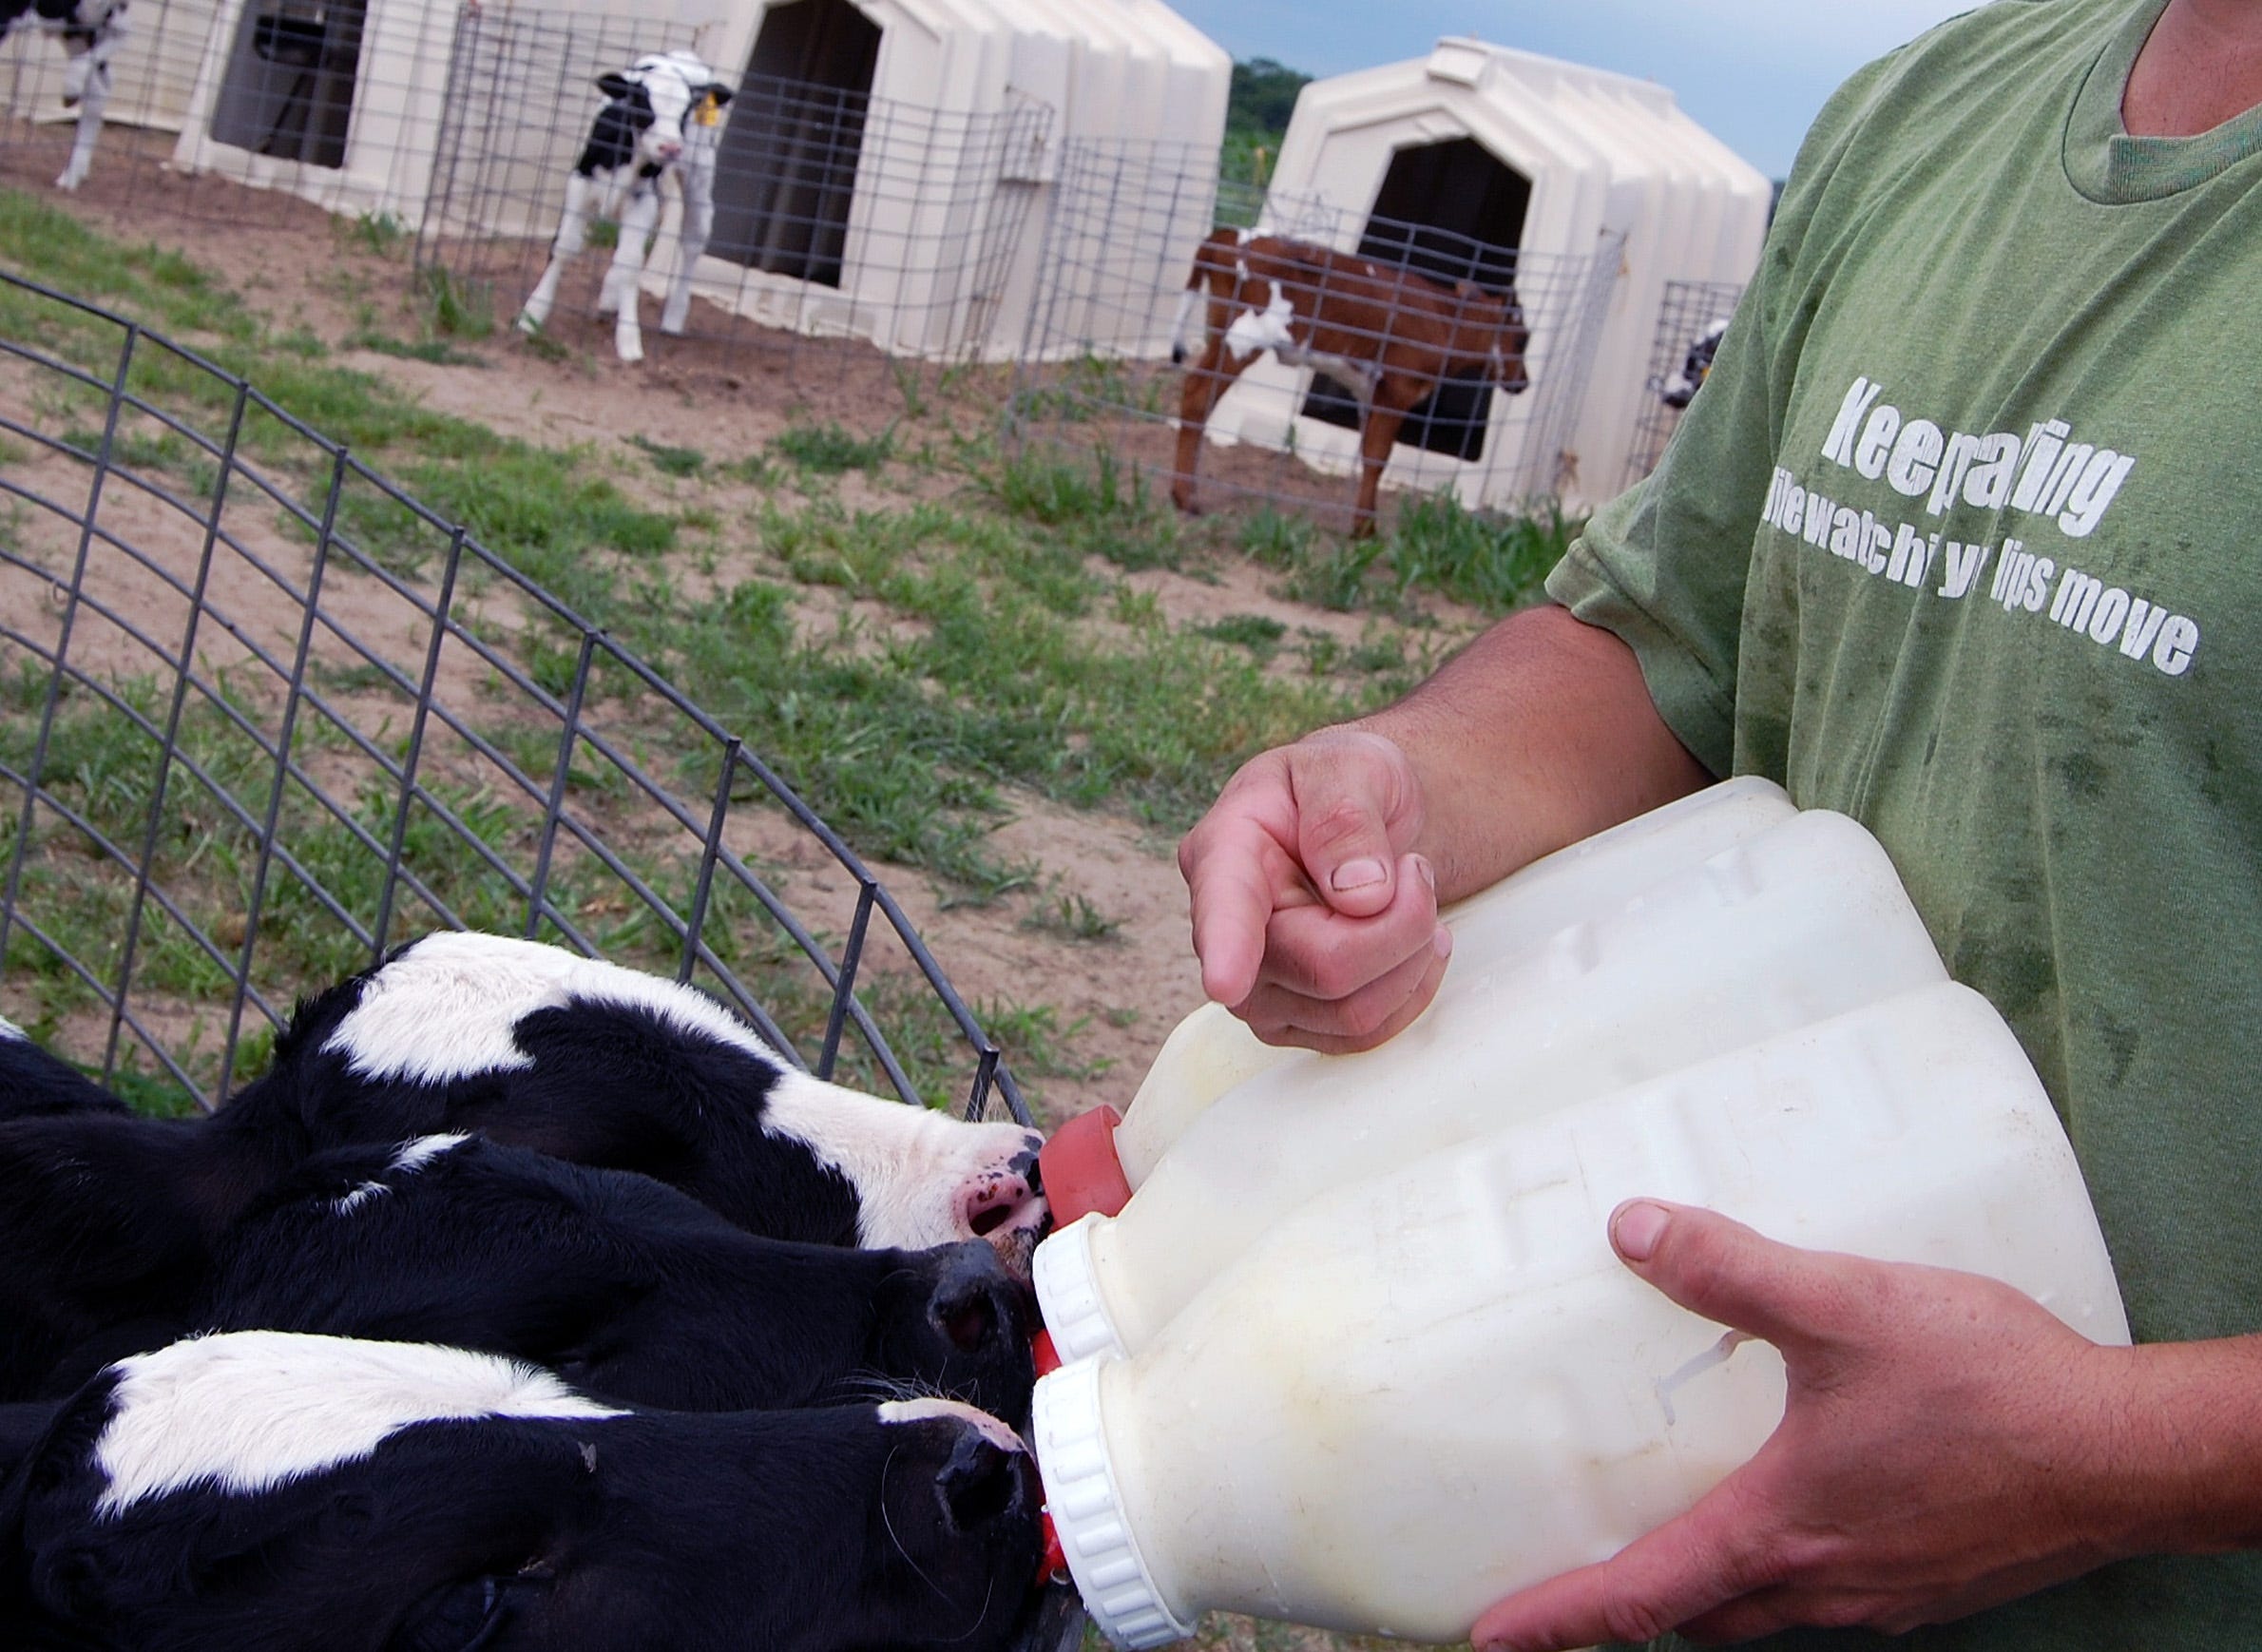 While a majority of dairy producers feed waste milk to calves, there are some risks associated with feeding milk containing antibiotic residues.